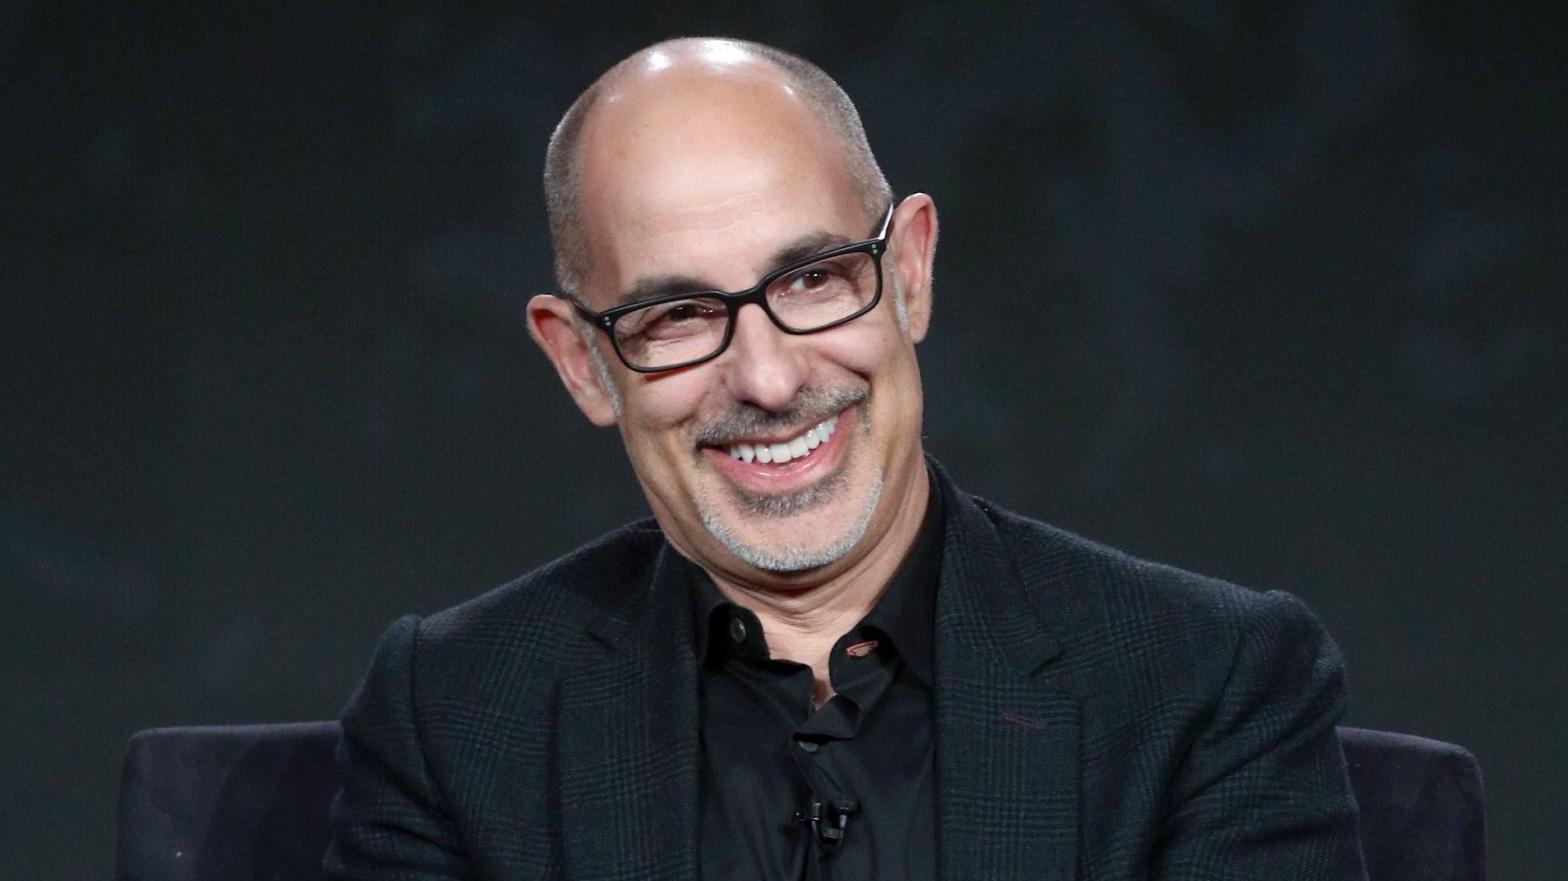 David S. Goyer at the the Winter Television Critics Association Press Tour in 2018. (Photo: Frederick M. Brown/Getty Images)